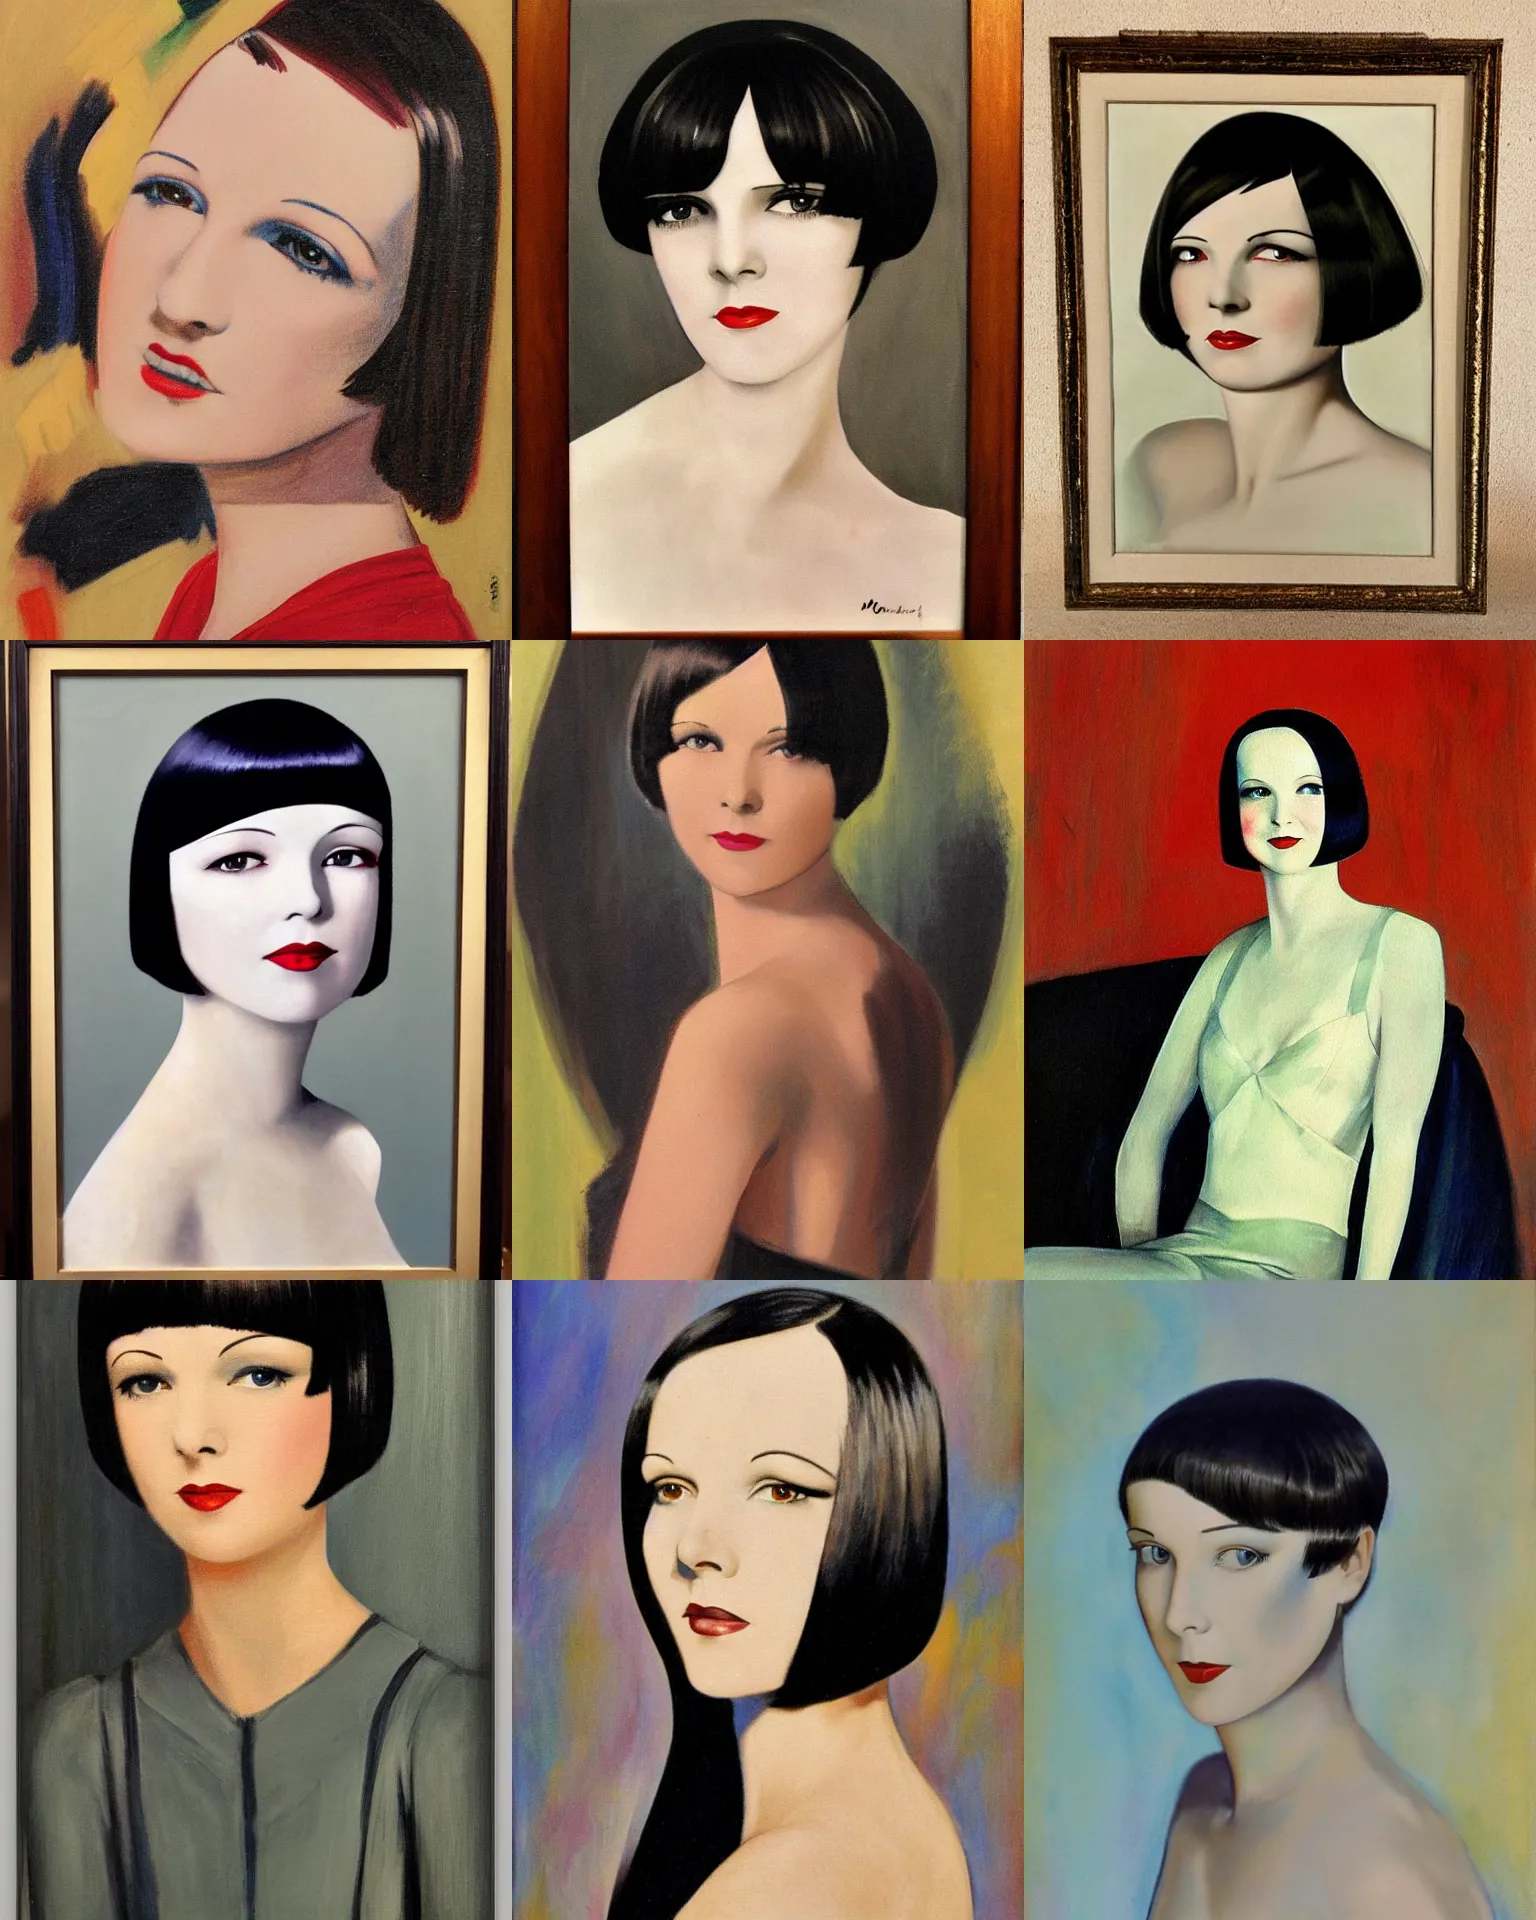 Prompt: painting of mary louise brooks 2 0 years old, bob haircut, portrait by robert mallet - stevens, 1 9 2 0 s, art decos